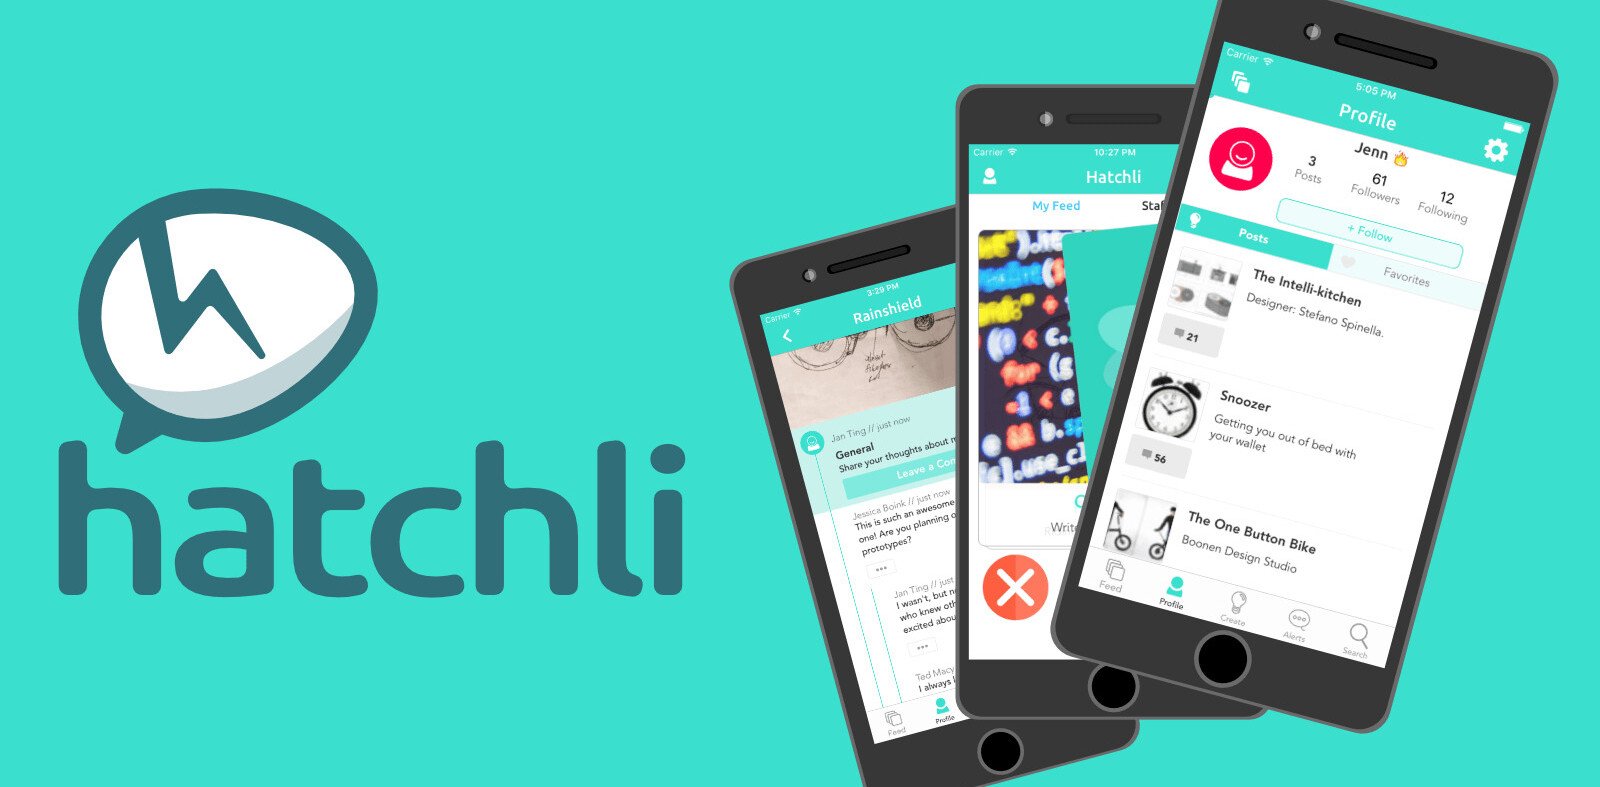 Hatchli is like Product Hunt for ideas, and it could be the next big thing